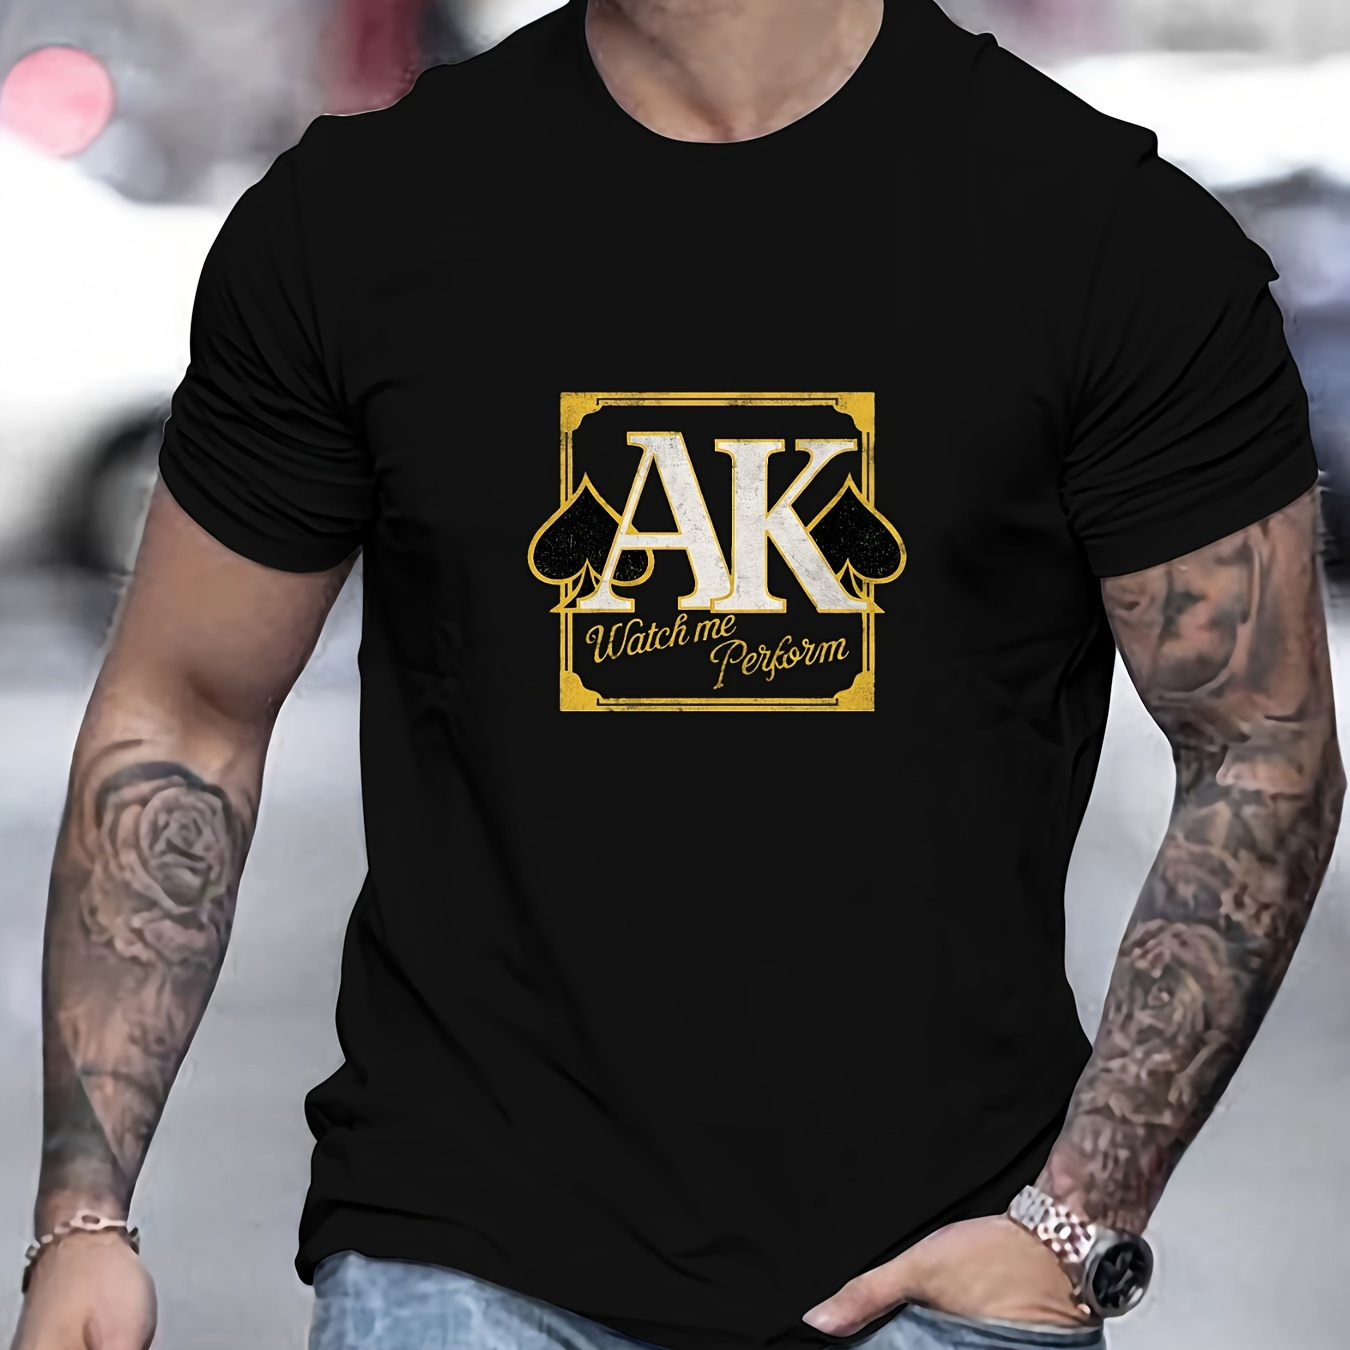 

Men's Cotton T-shirt With Spade Ak Graphic - Summer Casual Crew Neck Short Sleeve Tee, Knit Fabric Slight Stretch, Solid Color Regular Fit Top For Adult